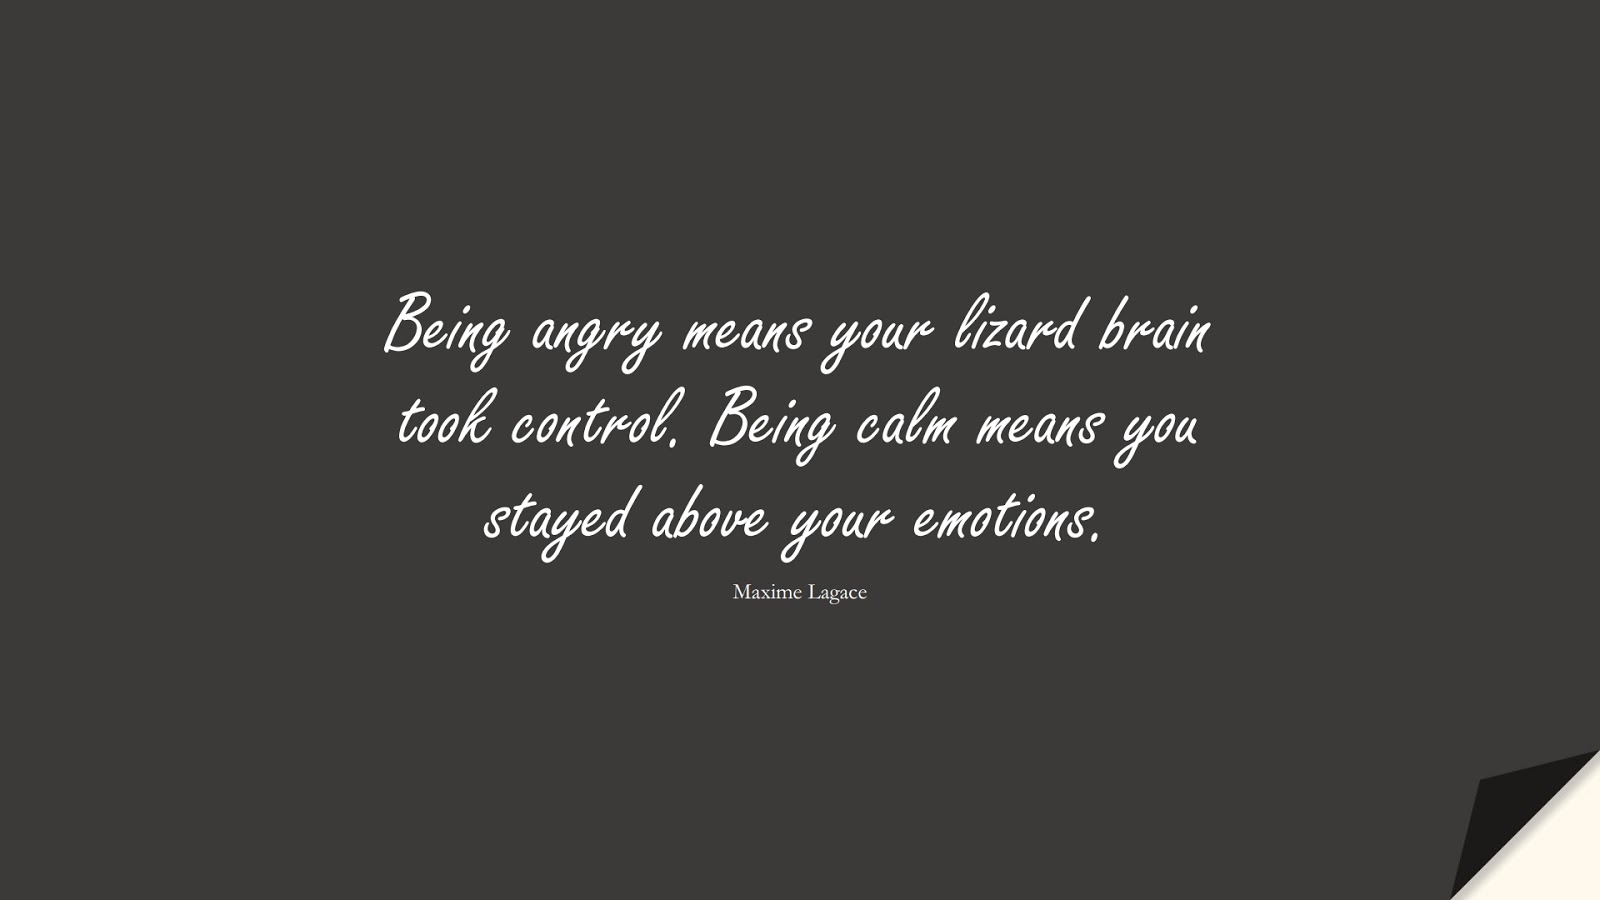 Being angry means your lizard brain took control. Being calm means you stayed above your emotions. (Maxime Lagace);  #StoicQuotes